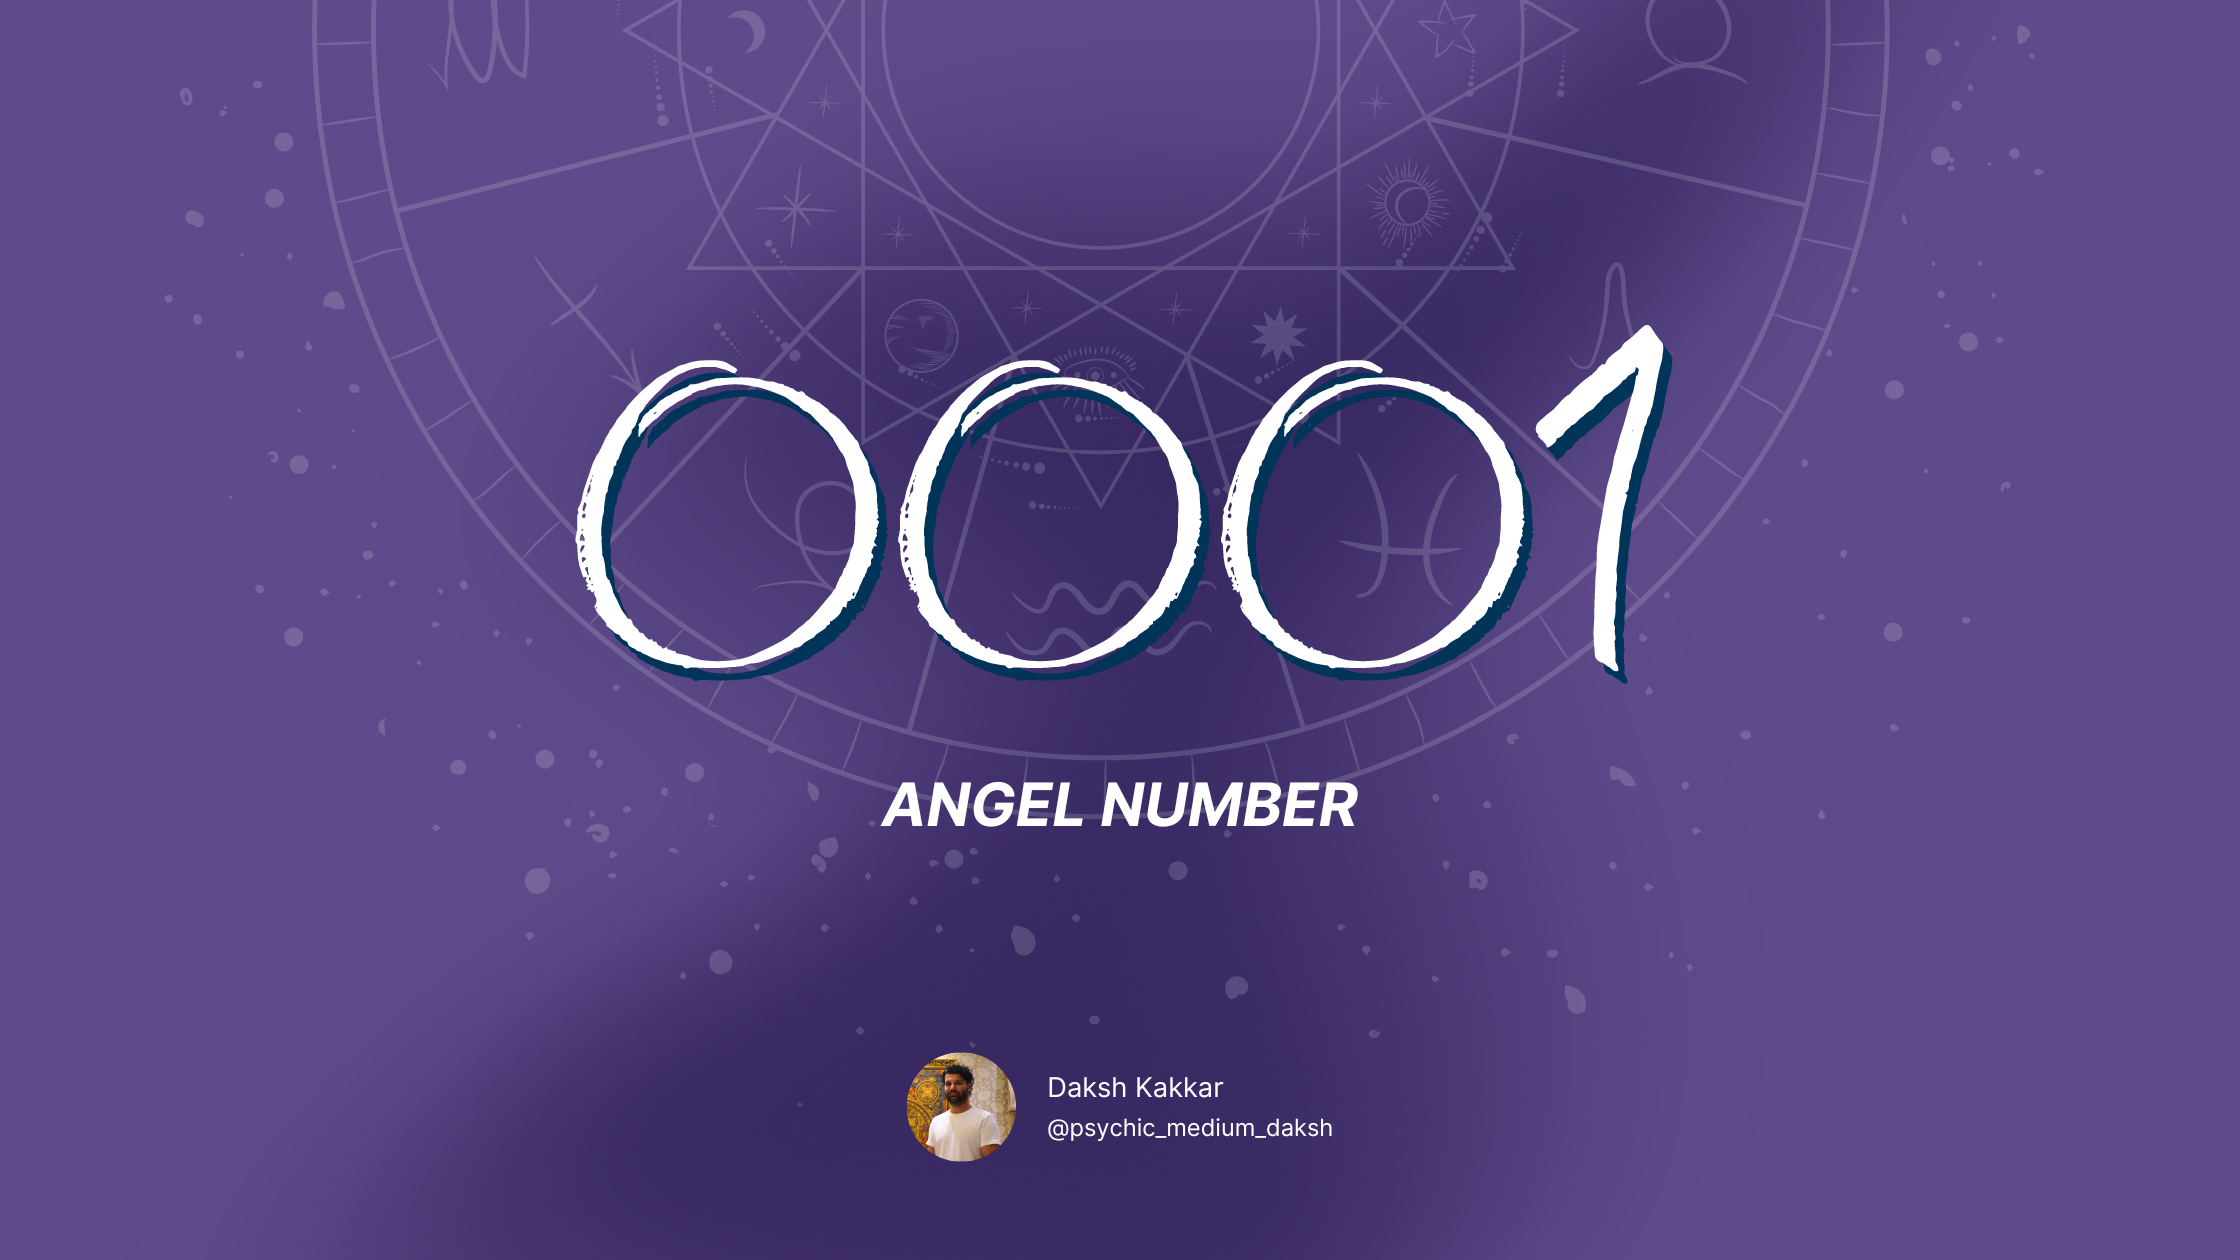 0001 angel number meaning